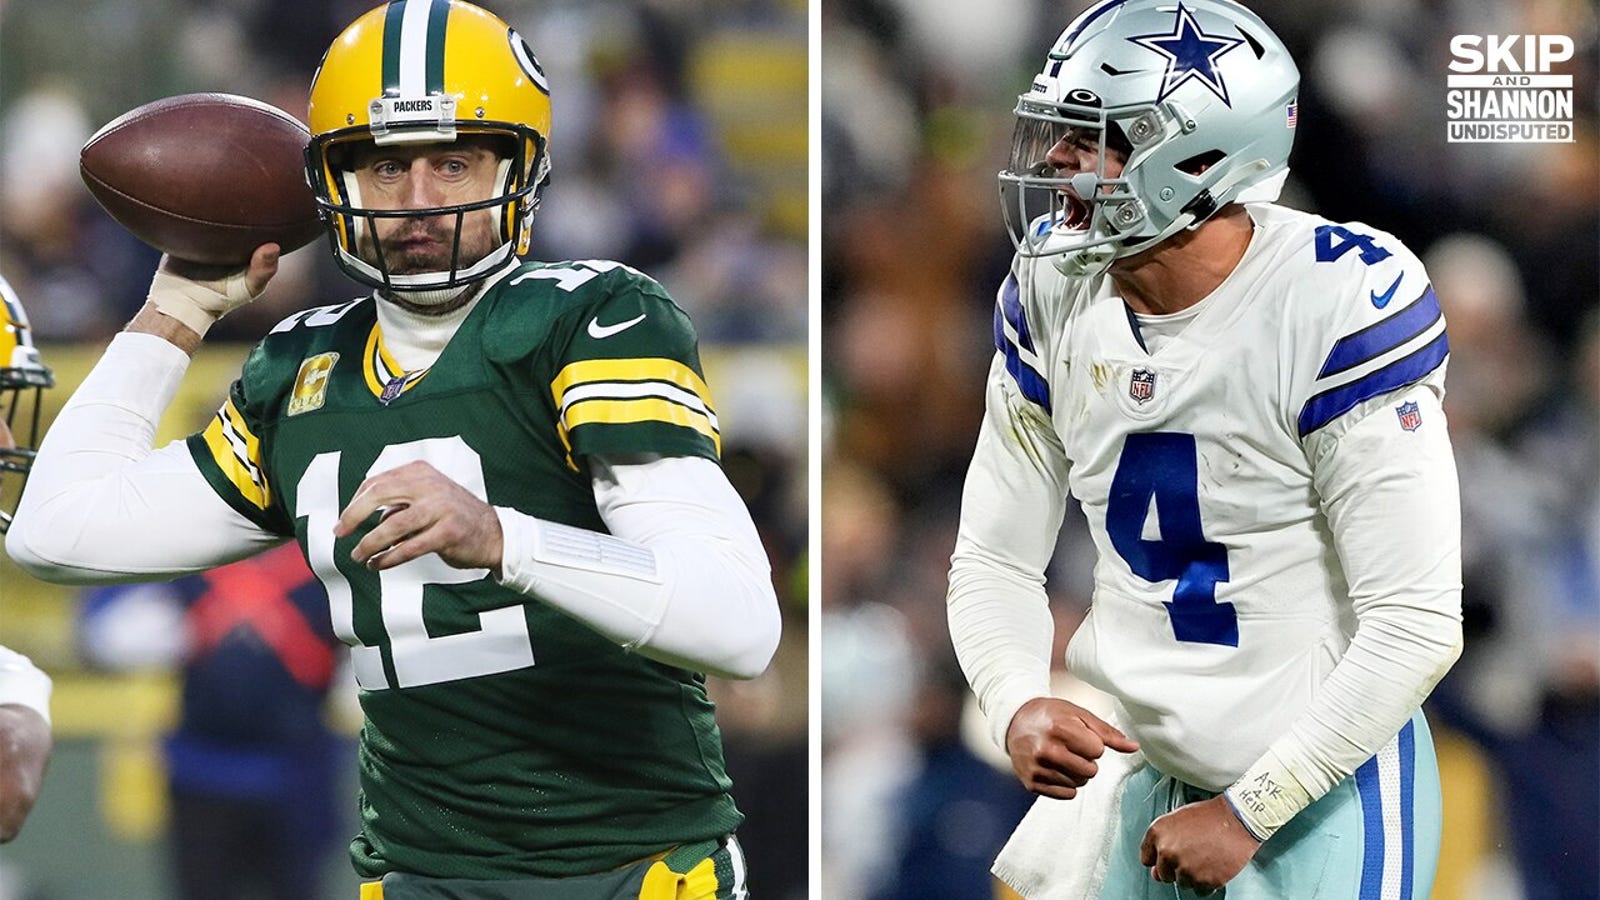 Cowboys fall short against Packers